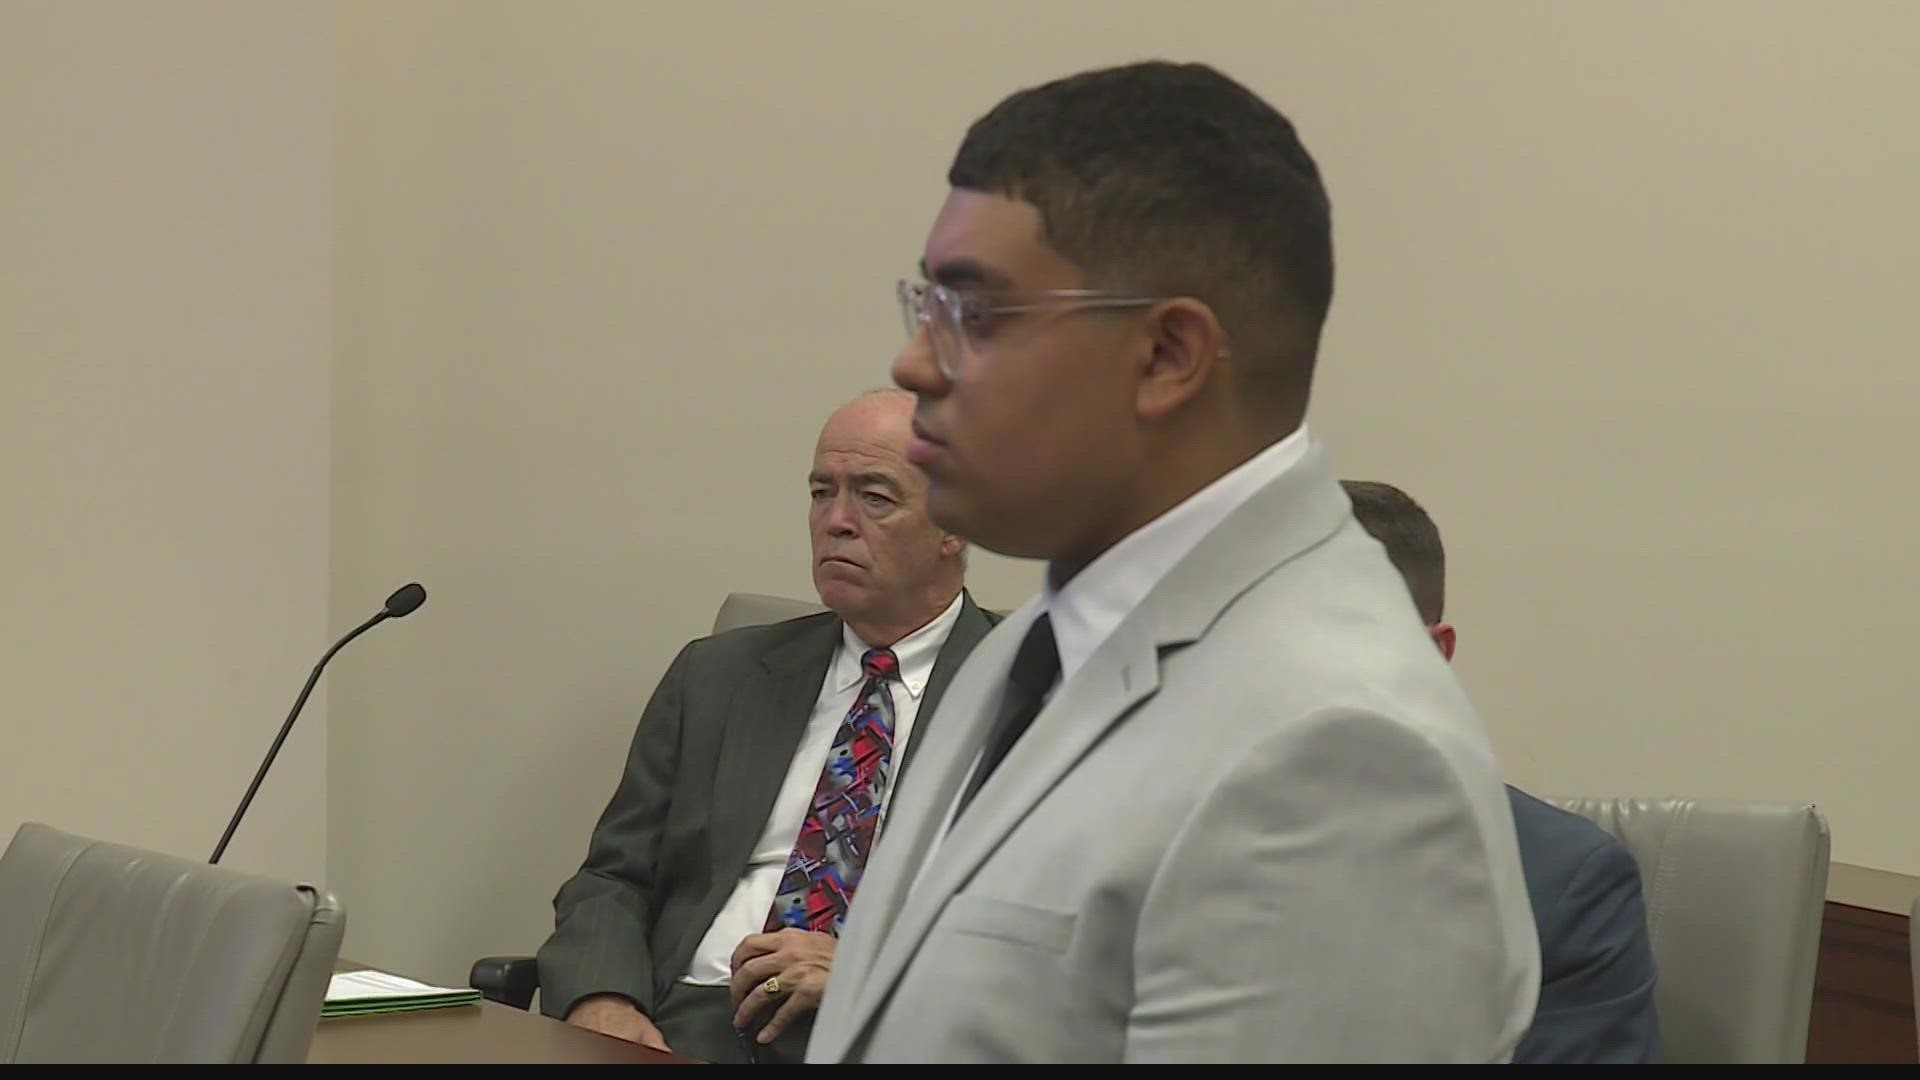 A judge revoked Anthony Guadalupe's bond after viewing a videotape of the alleged assault.